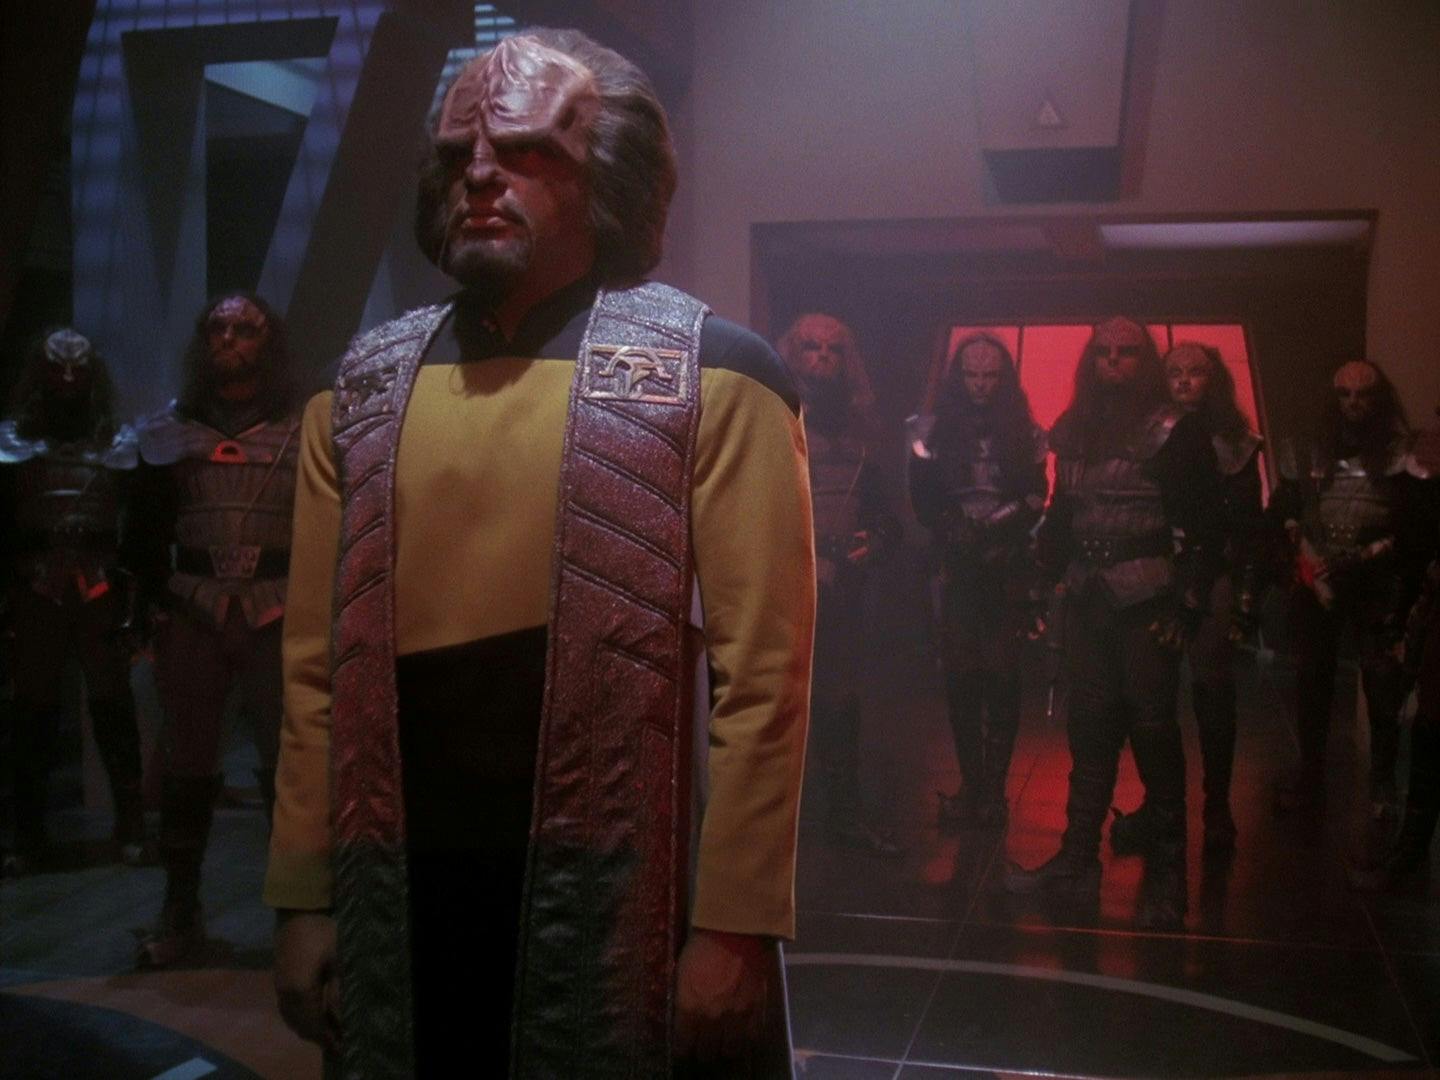 Worf stands before the Klingon High Council in his Starfleet uniform and ceremonial sash in 'Sins of the Father'